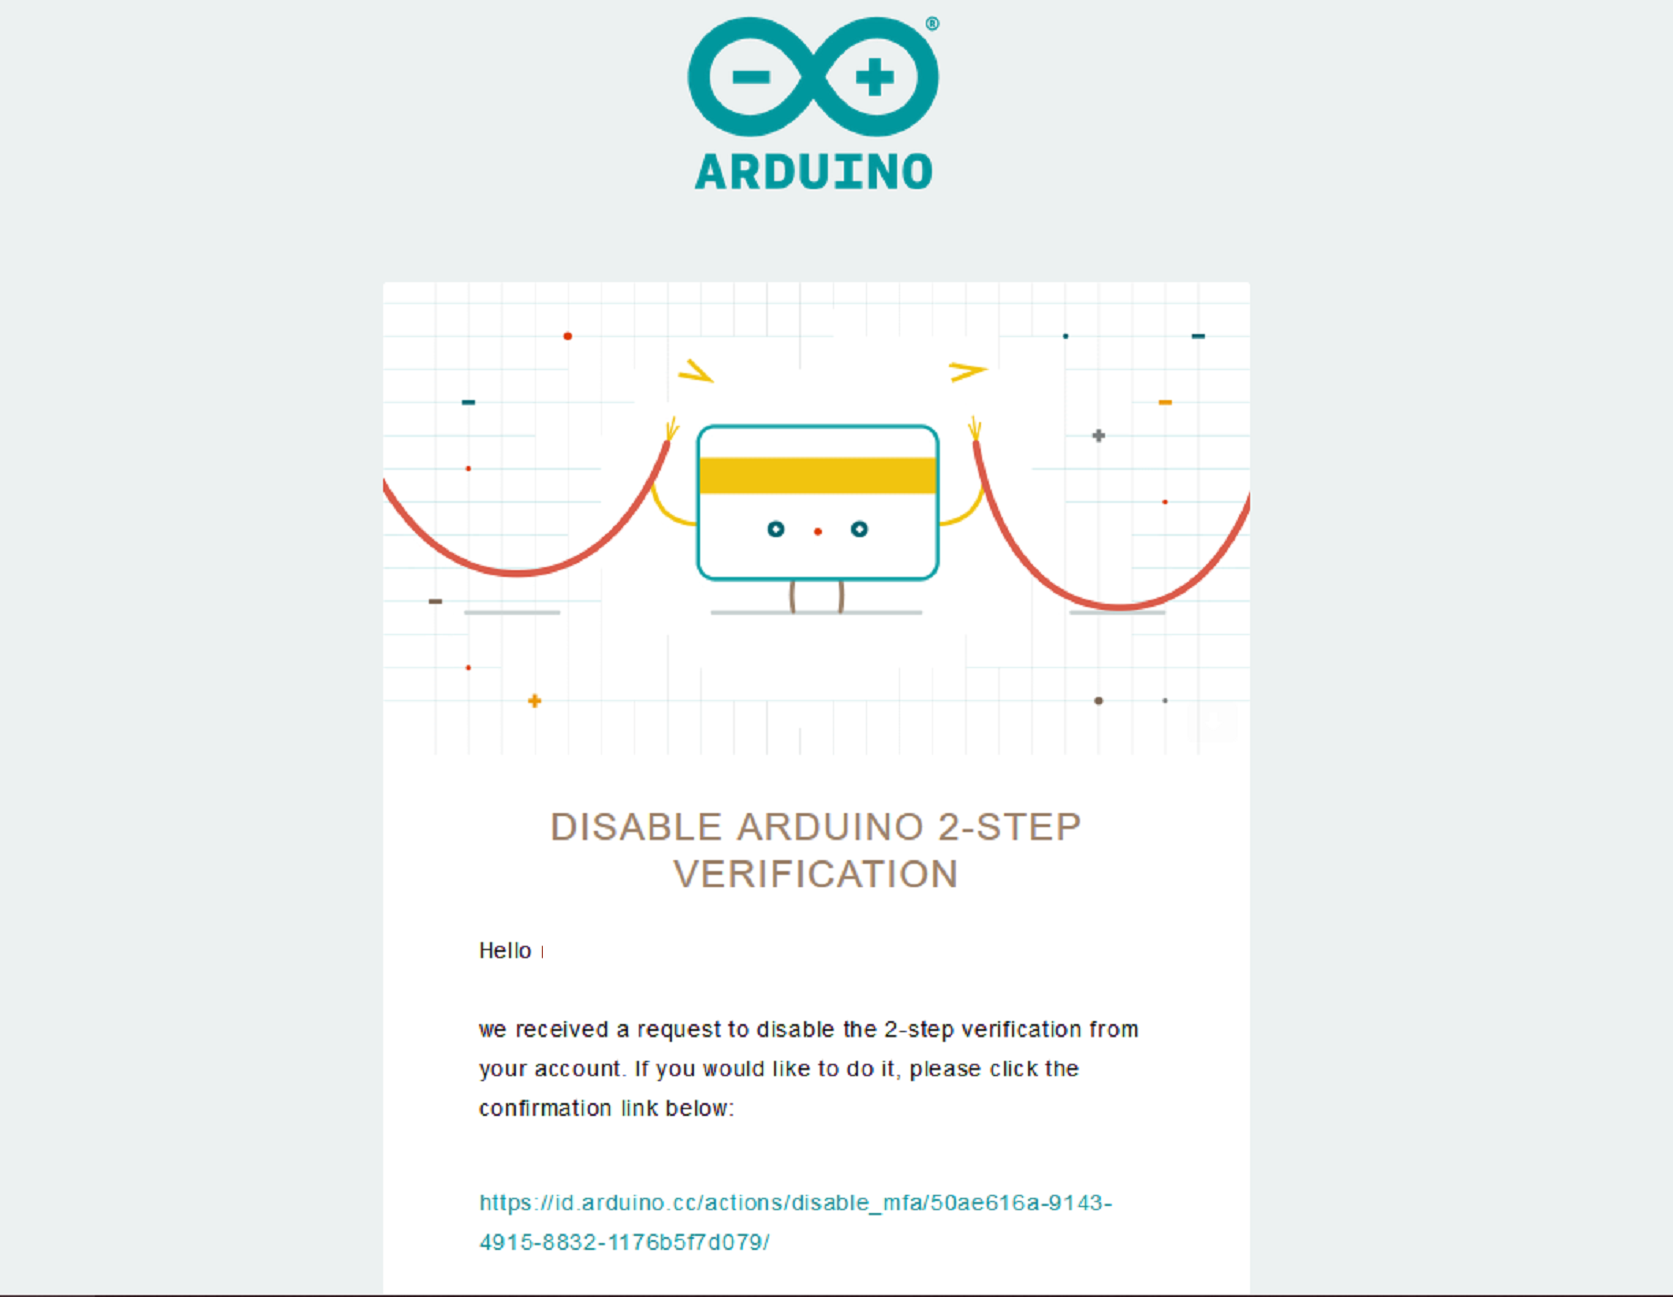 "Disable Arduino 2-step verification" email containing deactivation link